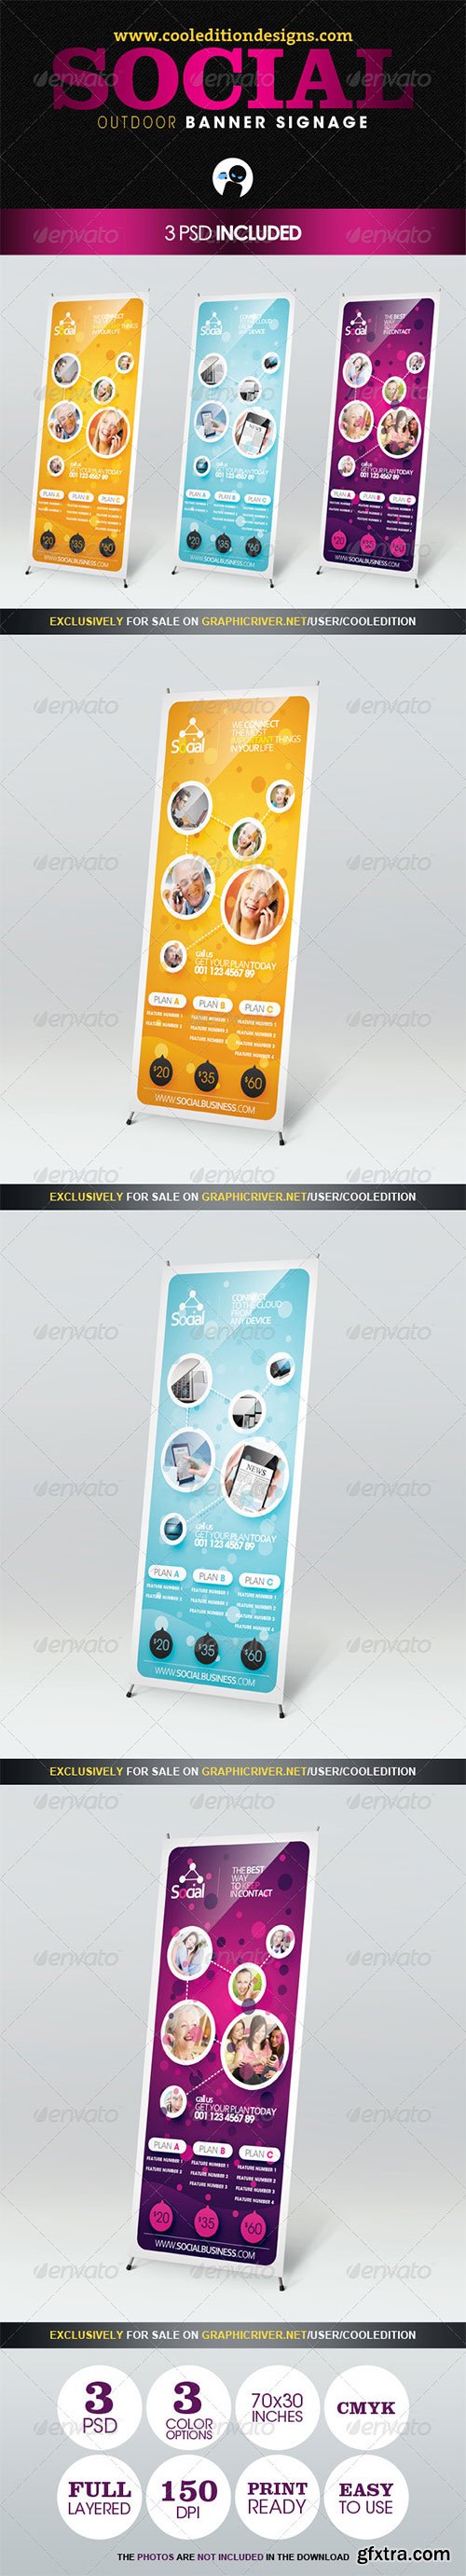 GraphicRiver - Social - Outdoor Banner Signage